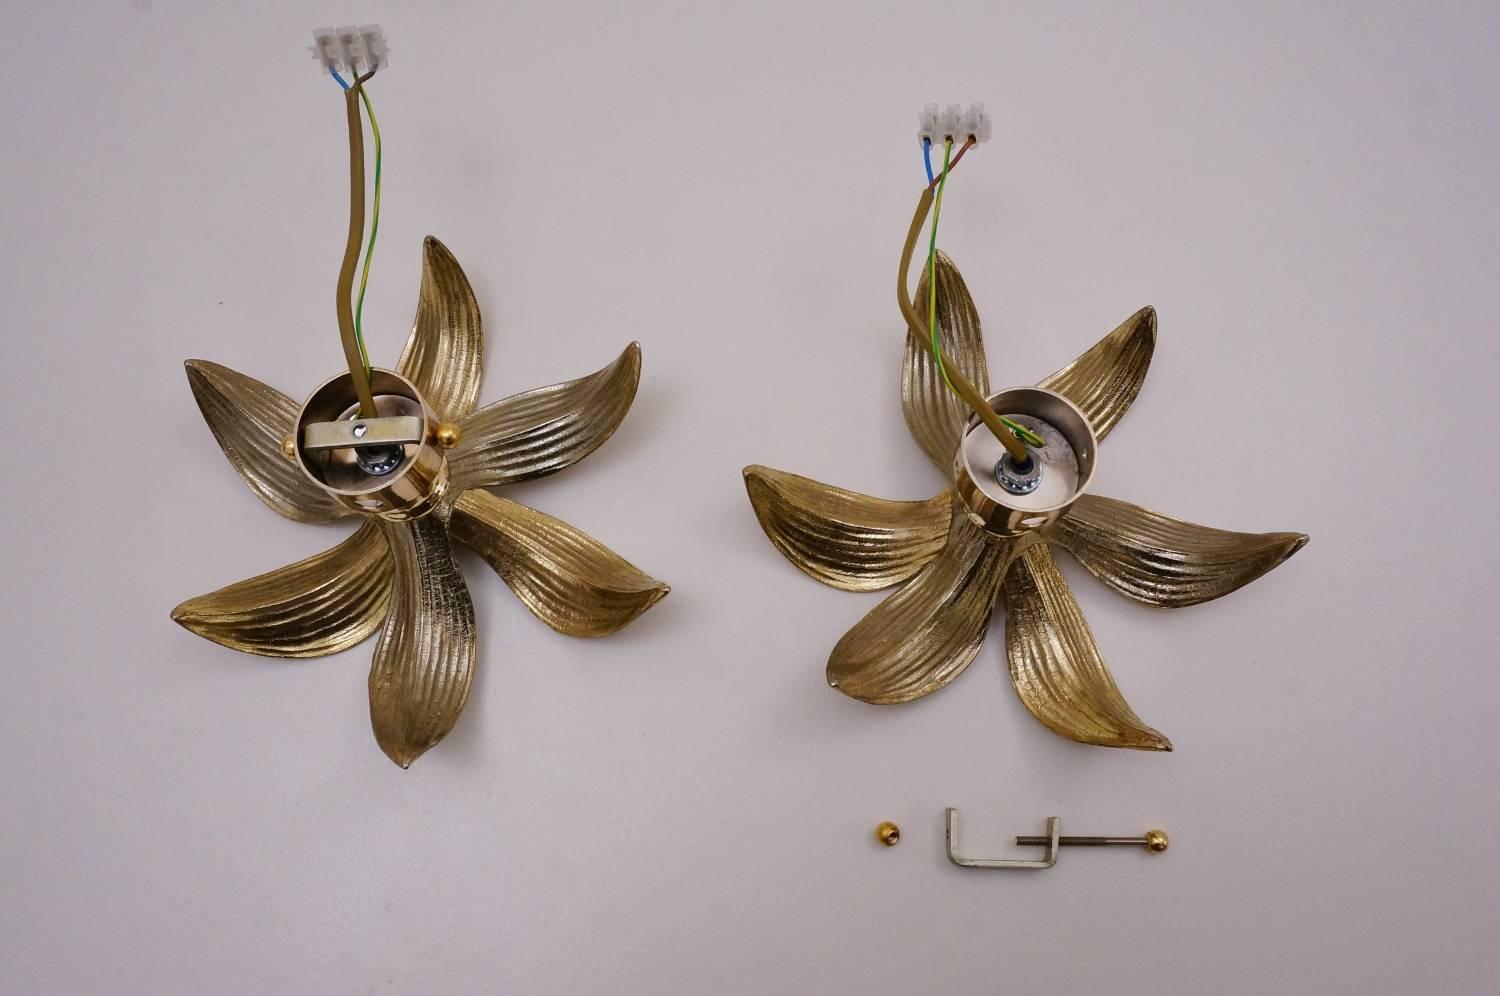 Brass Flower Wall Lights, a Pair by Massive, 1970s, Belgian, Willy Daro Style 1